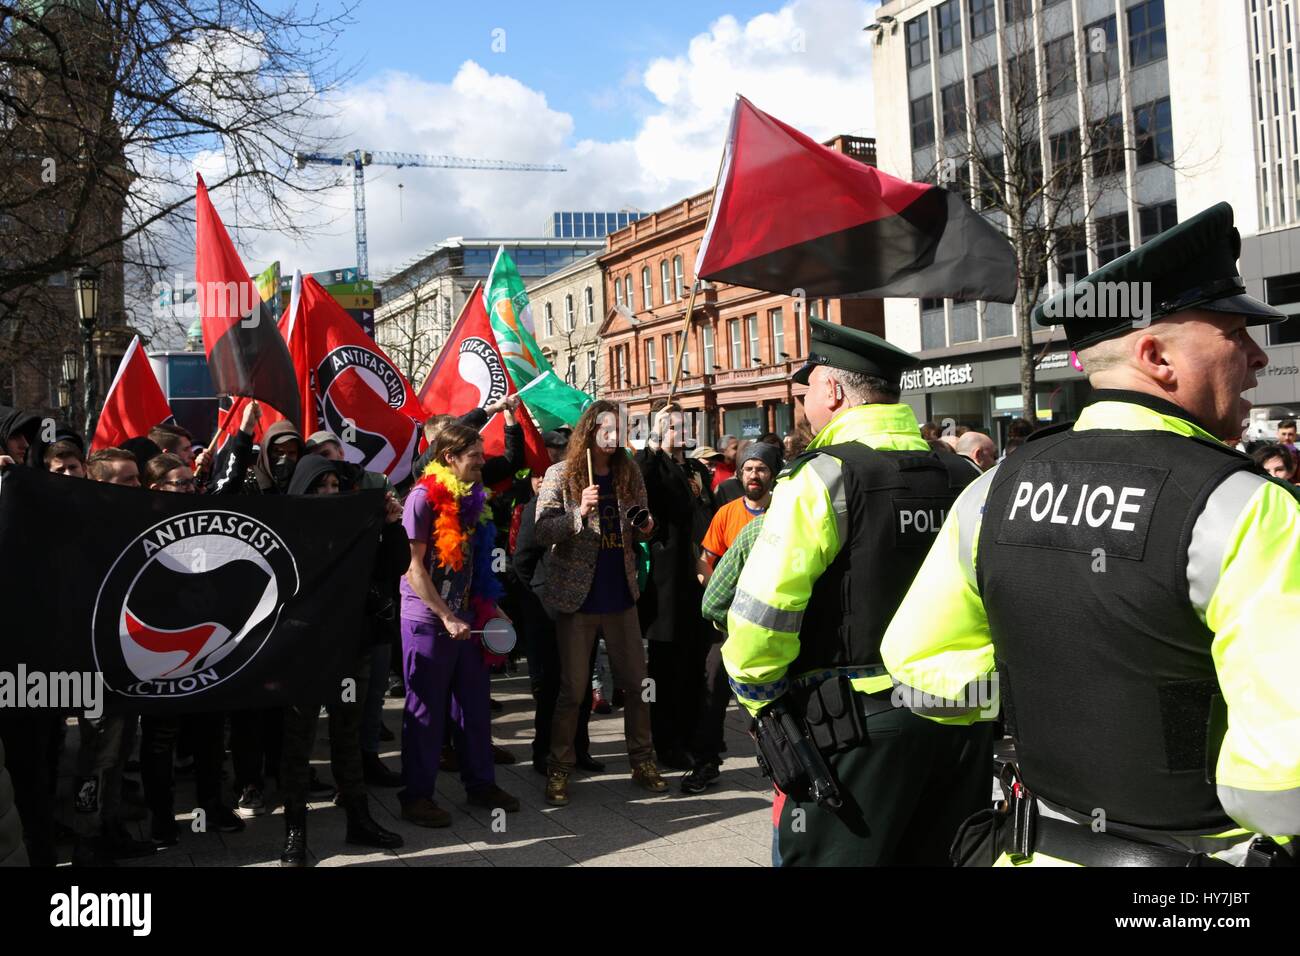 Belfast, Northern Ireland, UK. 1st April, 2017. Police monitor a crowd of anti fascist protesters outside Belfast city hall Credit: Conall Kearney/Alamy Live News Stock Photo